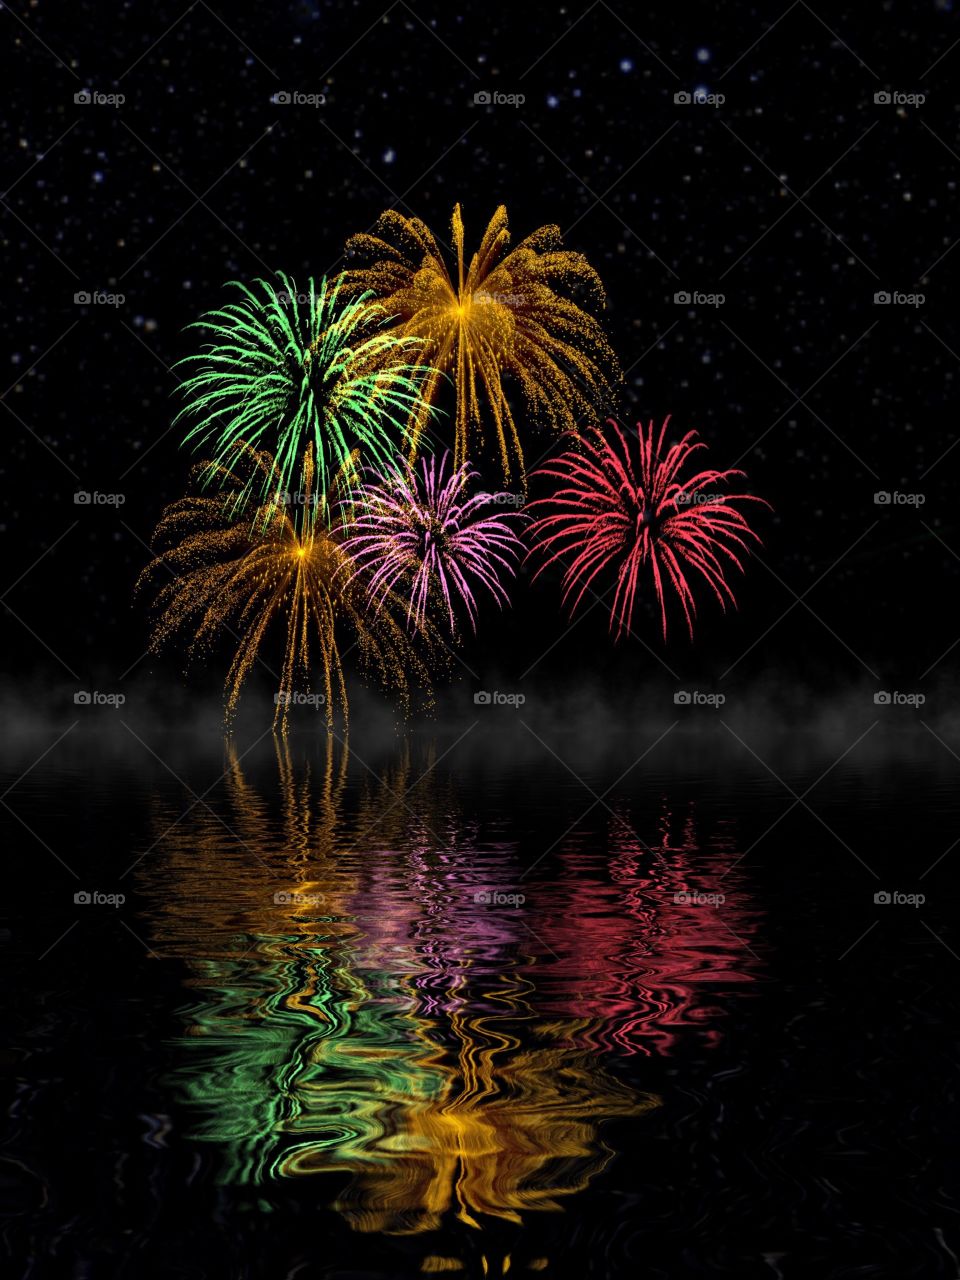 Fireworks reflected on water. Fireworks reflected on water
